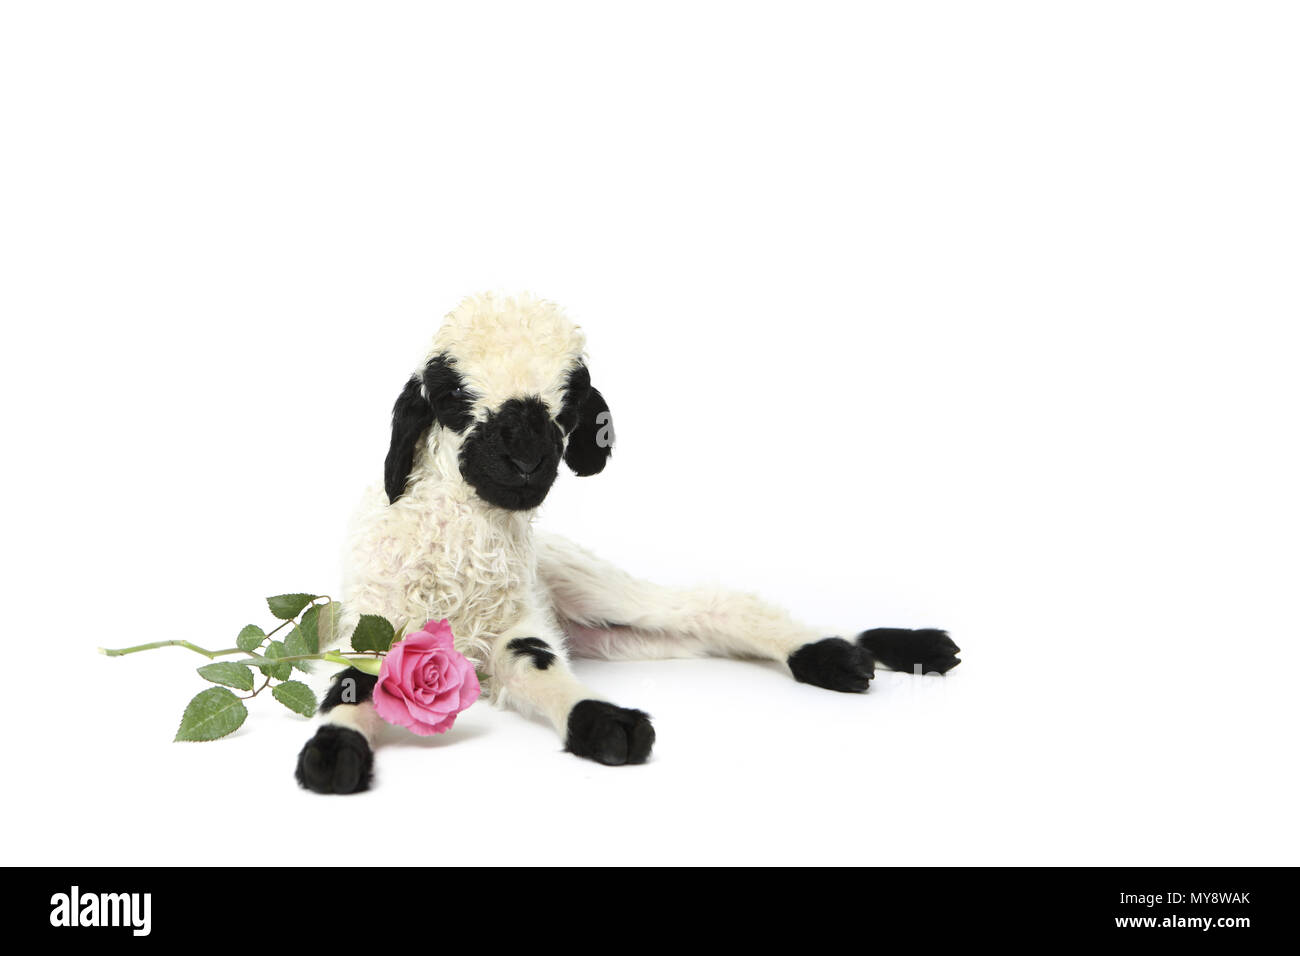 Valais Blacknose Sheep. Lamb (6 days old) lying next to a pink rose. Studio picture against a pink background. Germany Stock Photo